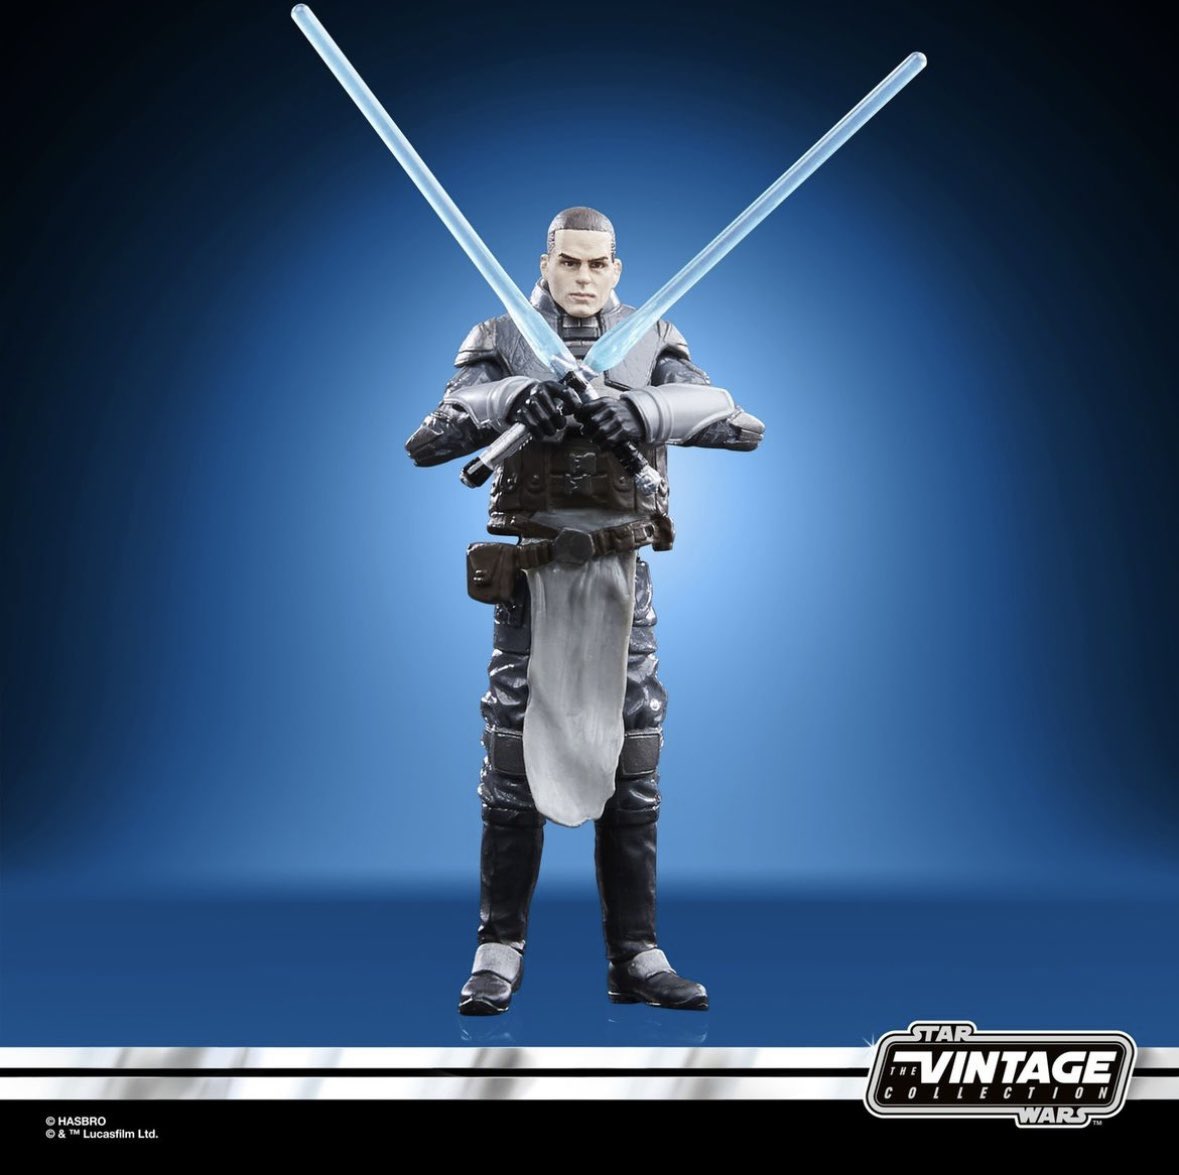 STAR WARS: THE VINTAGE COLLECTION STARKILLER
(HASBRO/Ages 4 years & up/Approx. Retail Price: $16.99 / Available: Spring 2023)

Available this Spring at Hasbro Pulse and most major retailers.

#swtvc #starwars #starwarsthevintagecollection #thevintagecollection #tvc #backtvc